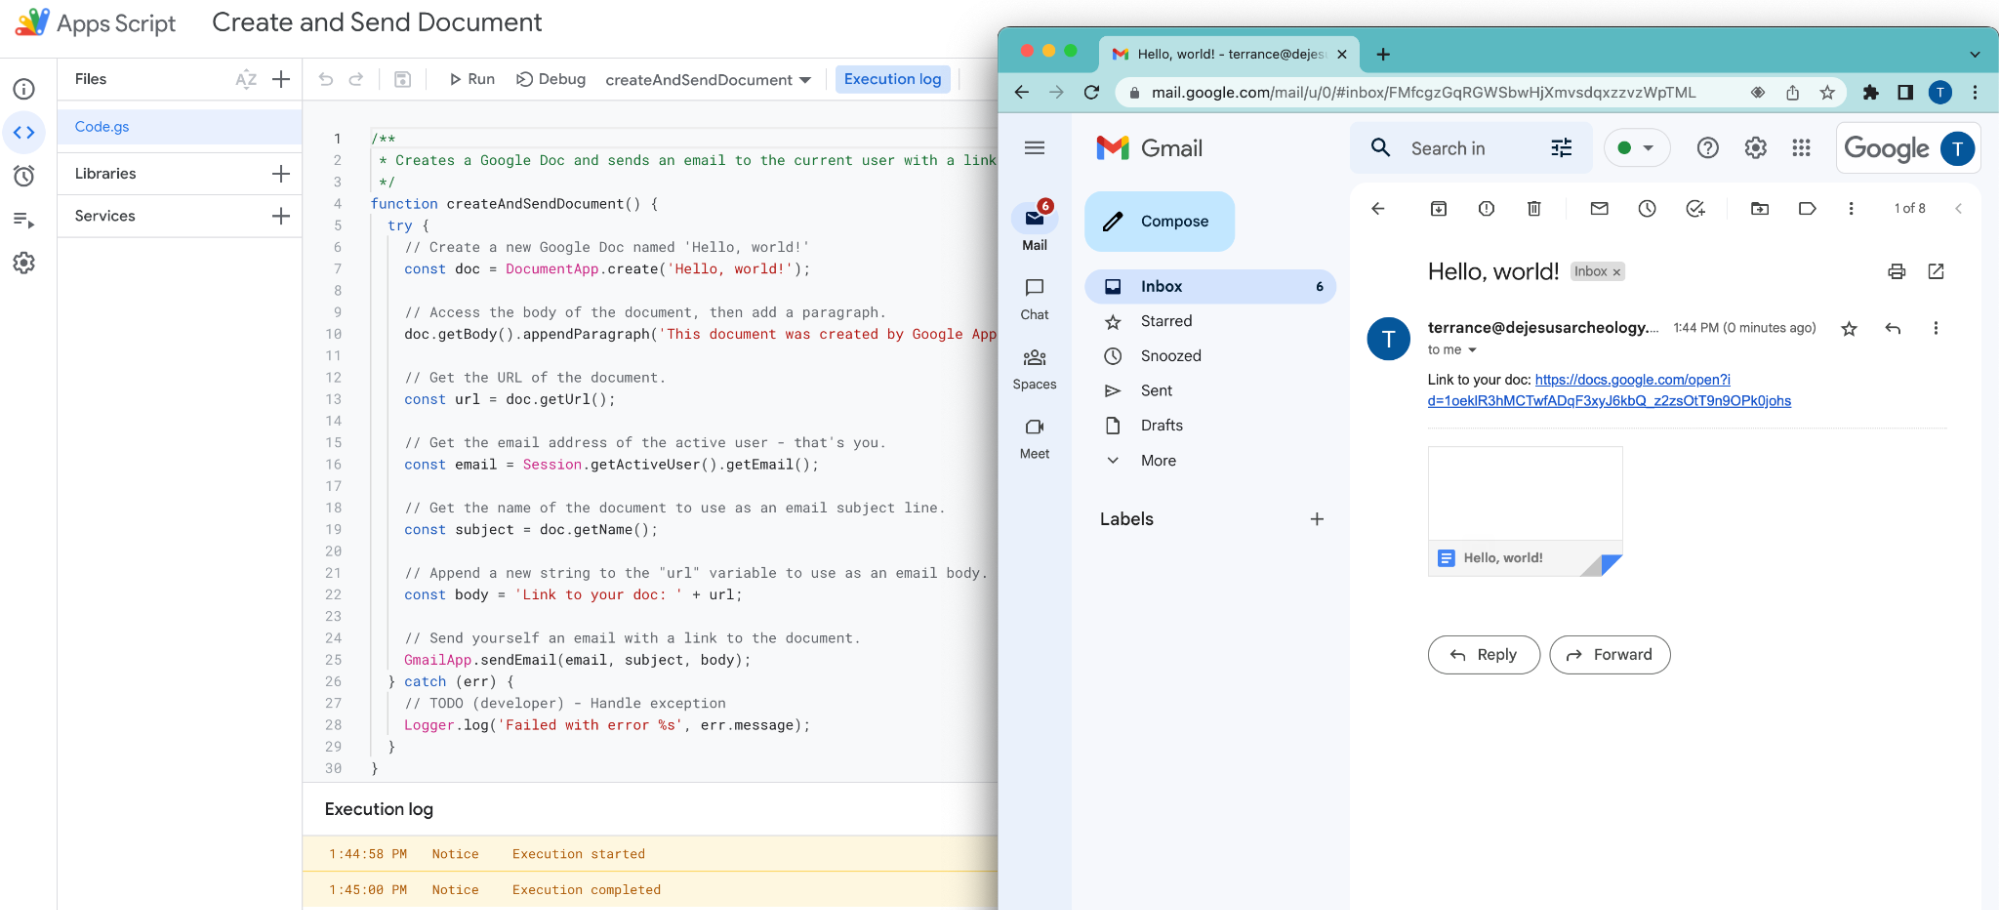 Apps Script code written to create a Google doc and email it to myself